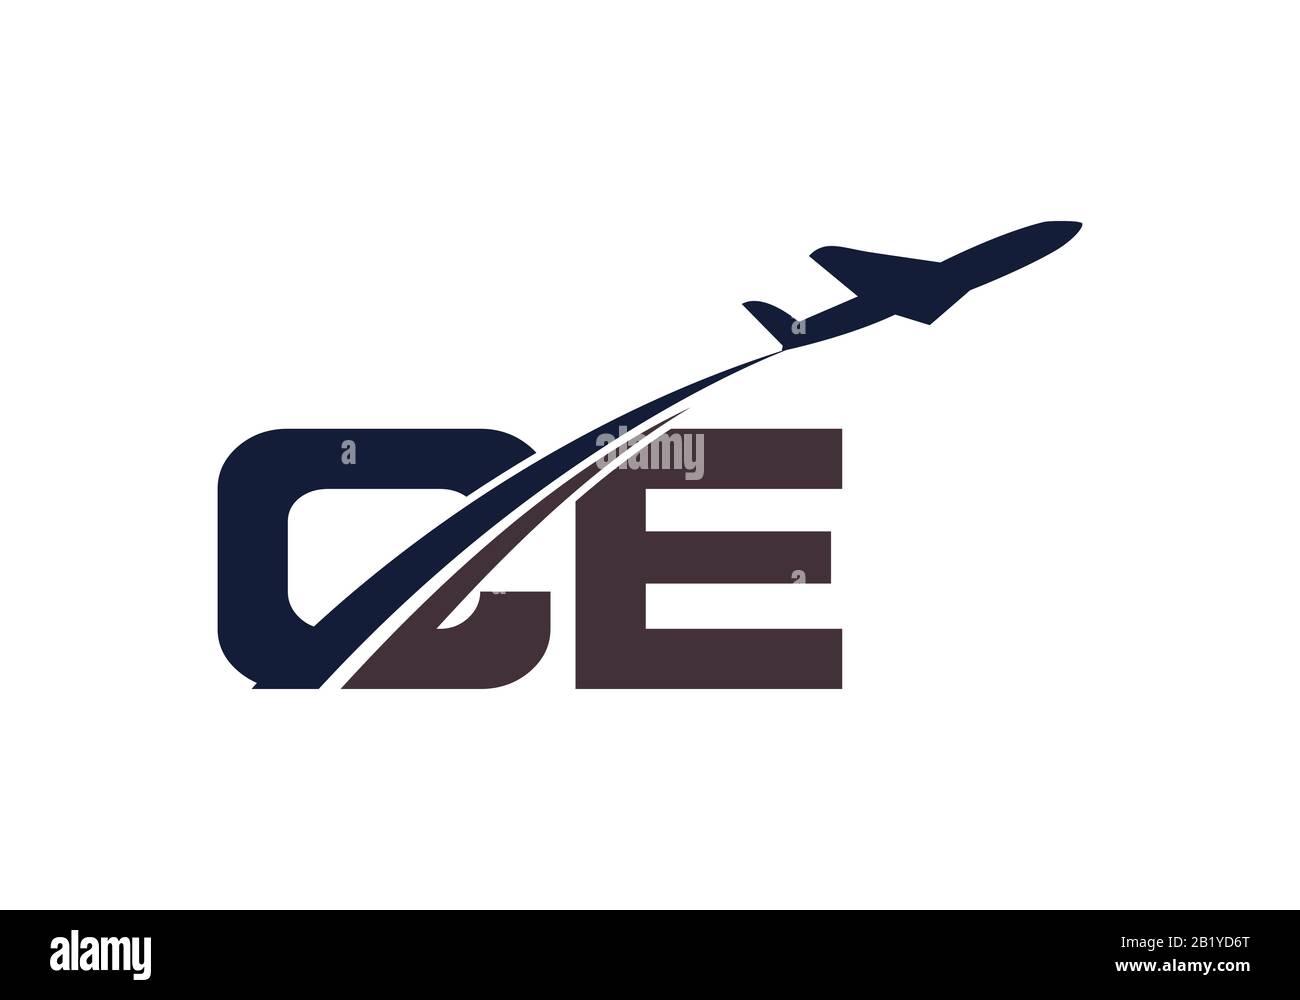 Initial Letter C and E  with Aviation Logo Design, Air, Airline, Airplane and Travel Logo template. Stock Vector